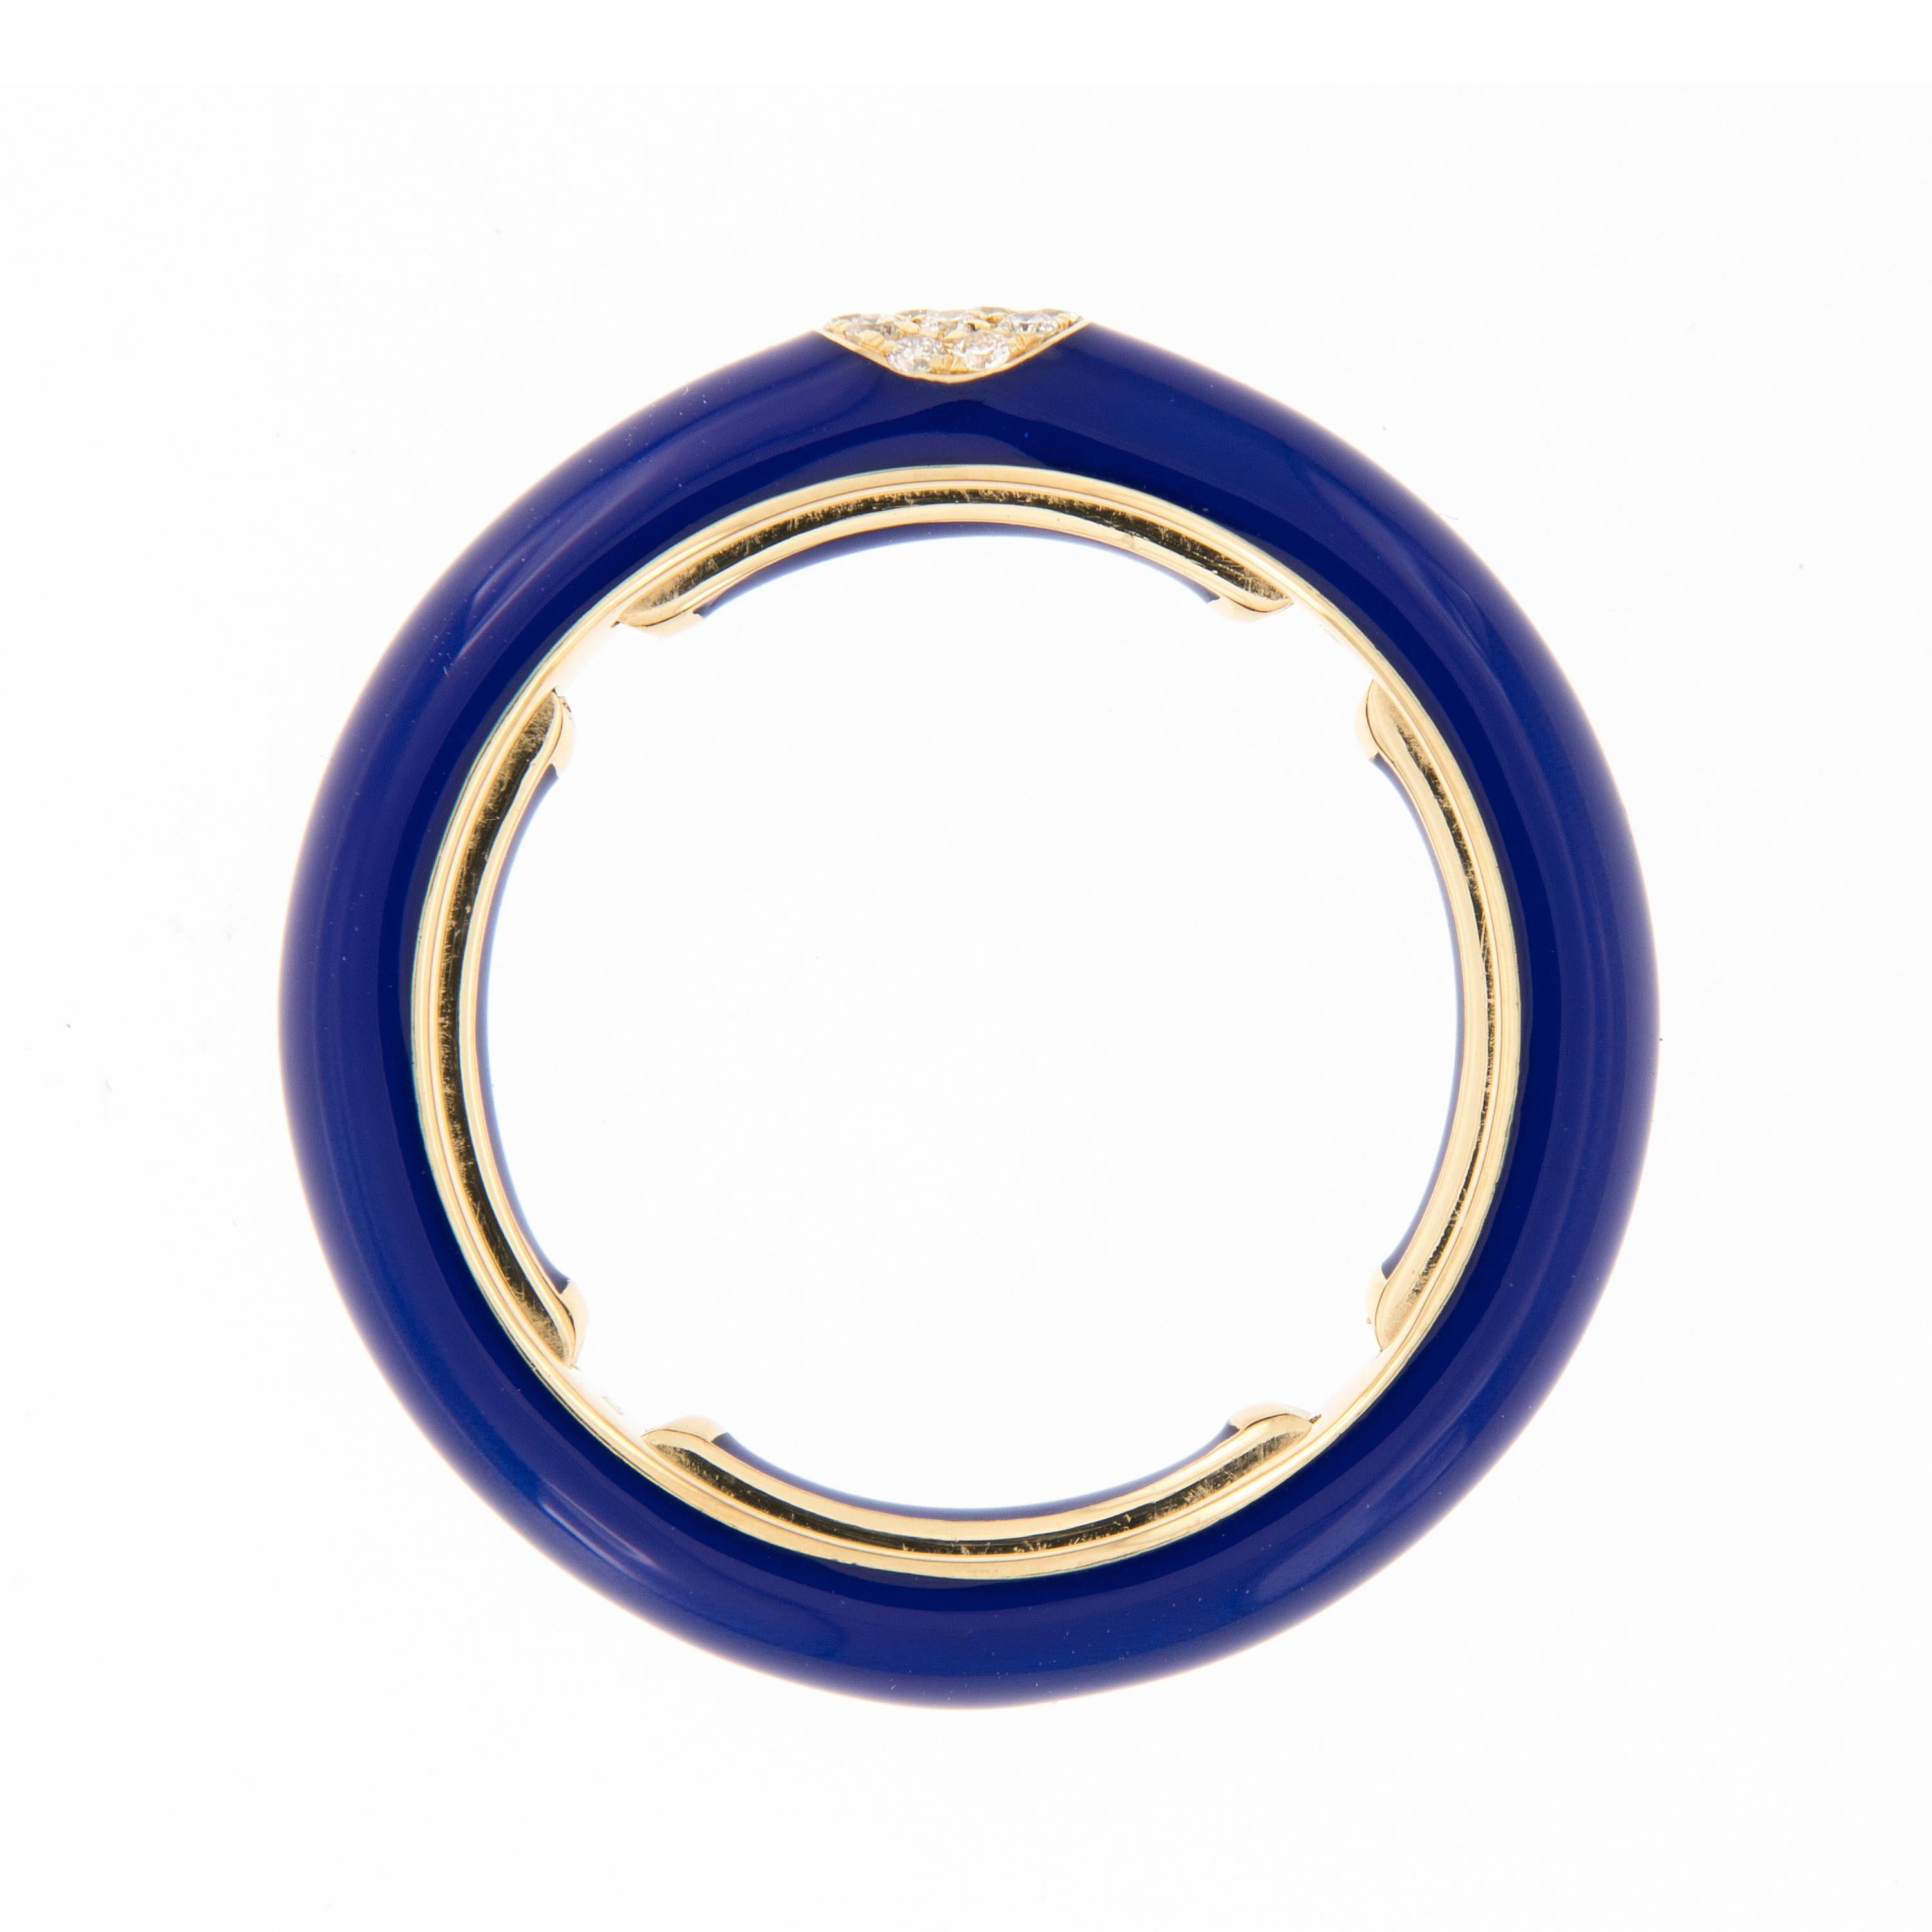 Bold, bright and beautiful! This contemporary enamel ring is hand-crafted in Italy for Campanelli & Pear. Ring is 18k yellow gold featuring a smooth enamel finish in lapis blue and accented with 14 pave set diamonds. The ring features a unique